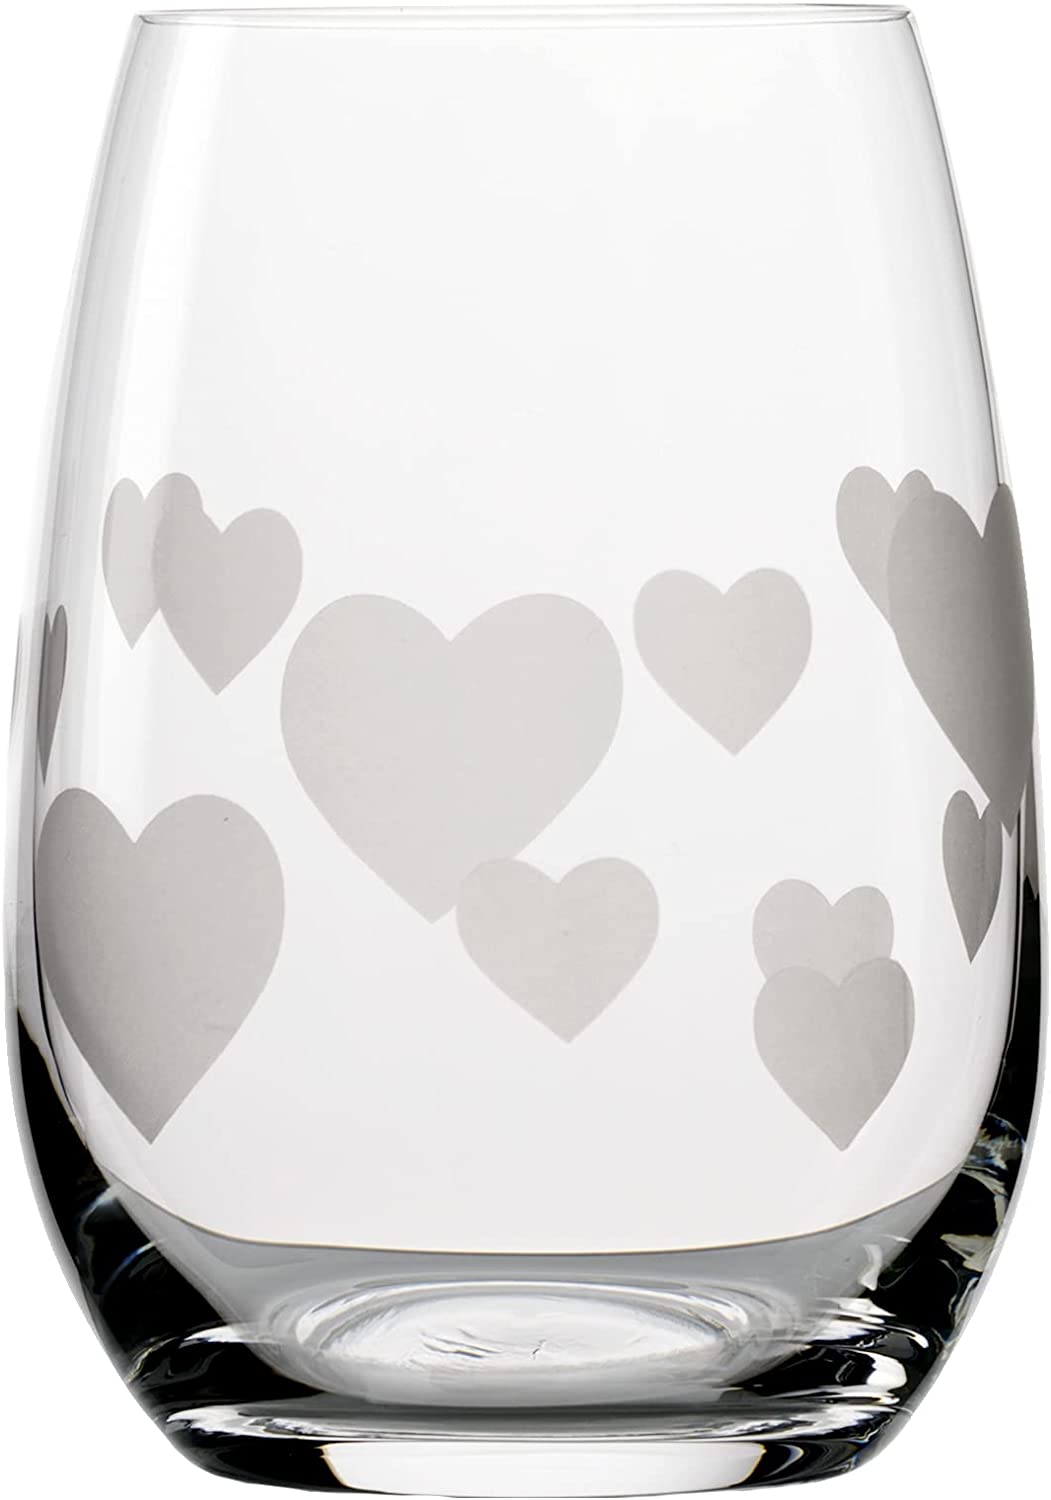 STÖLZLE LAUSITZ L\'Amour Glasses with Satinised Hearts 335 ml I Drinking Gl